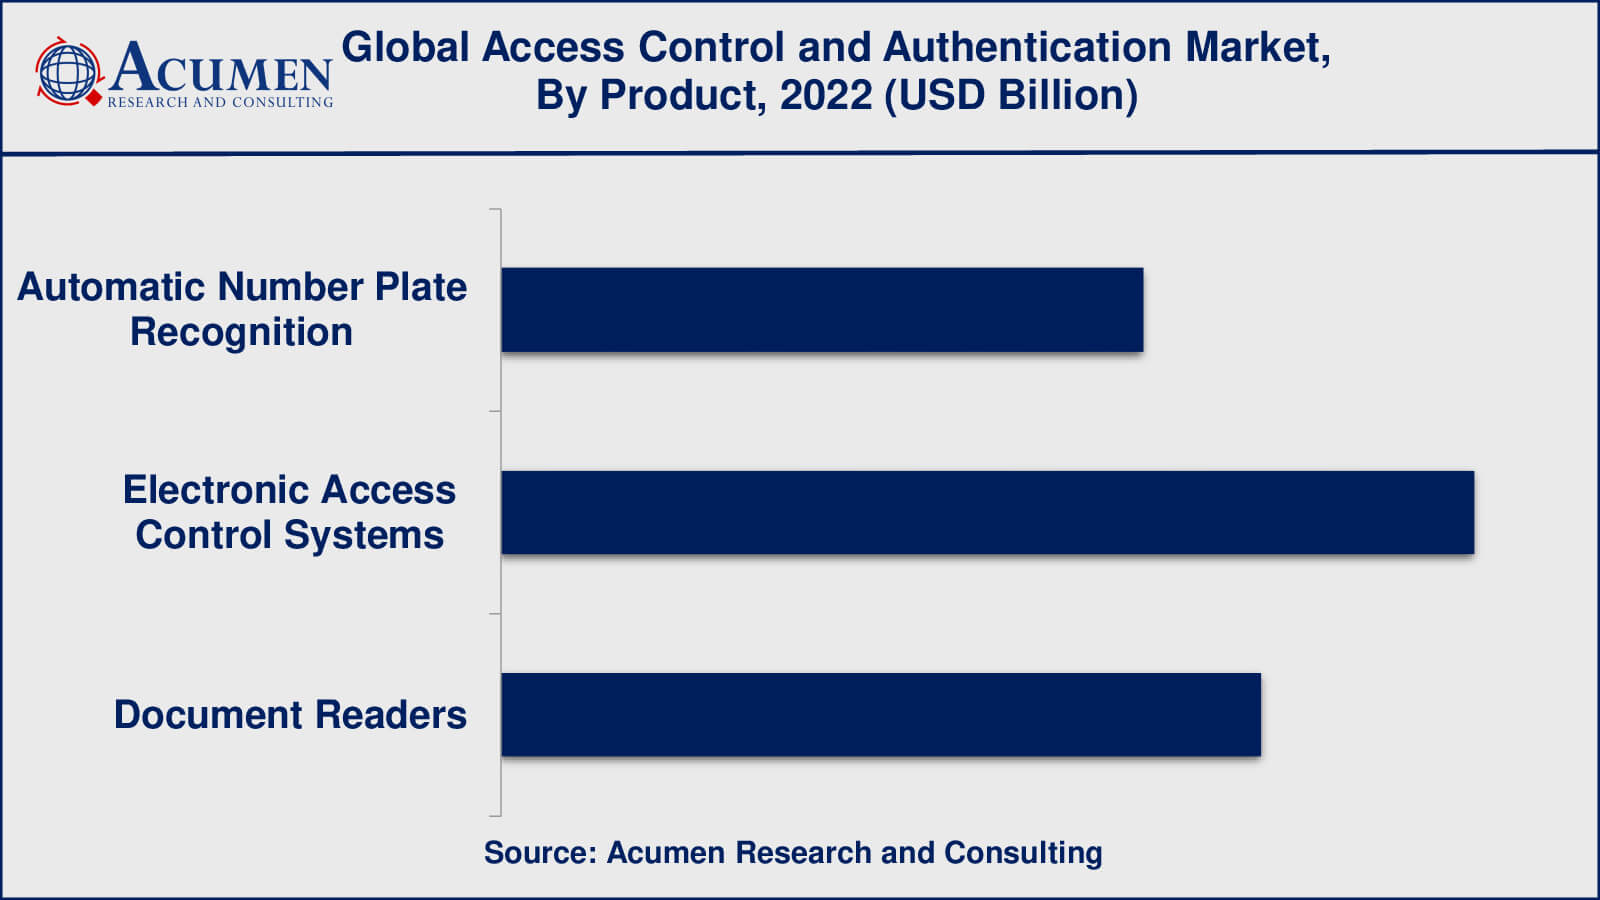 Access Control and Authentication Market Opportunities